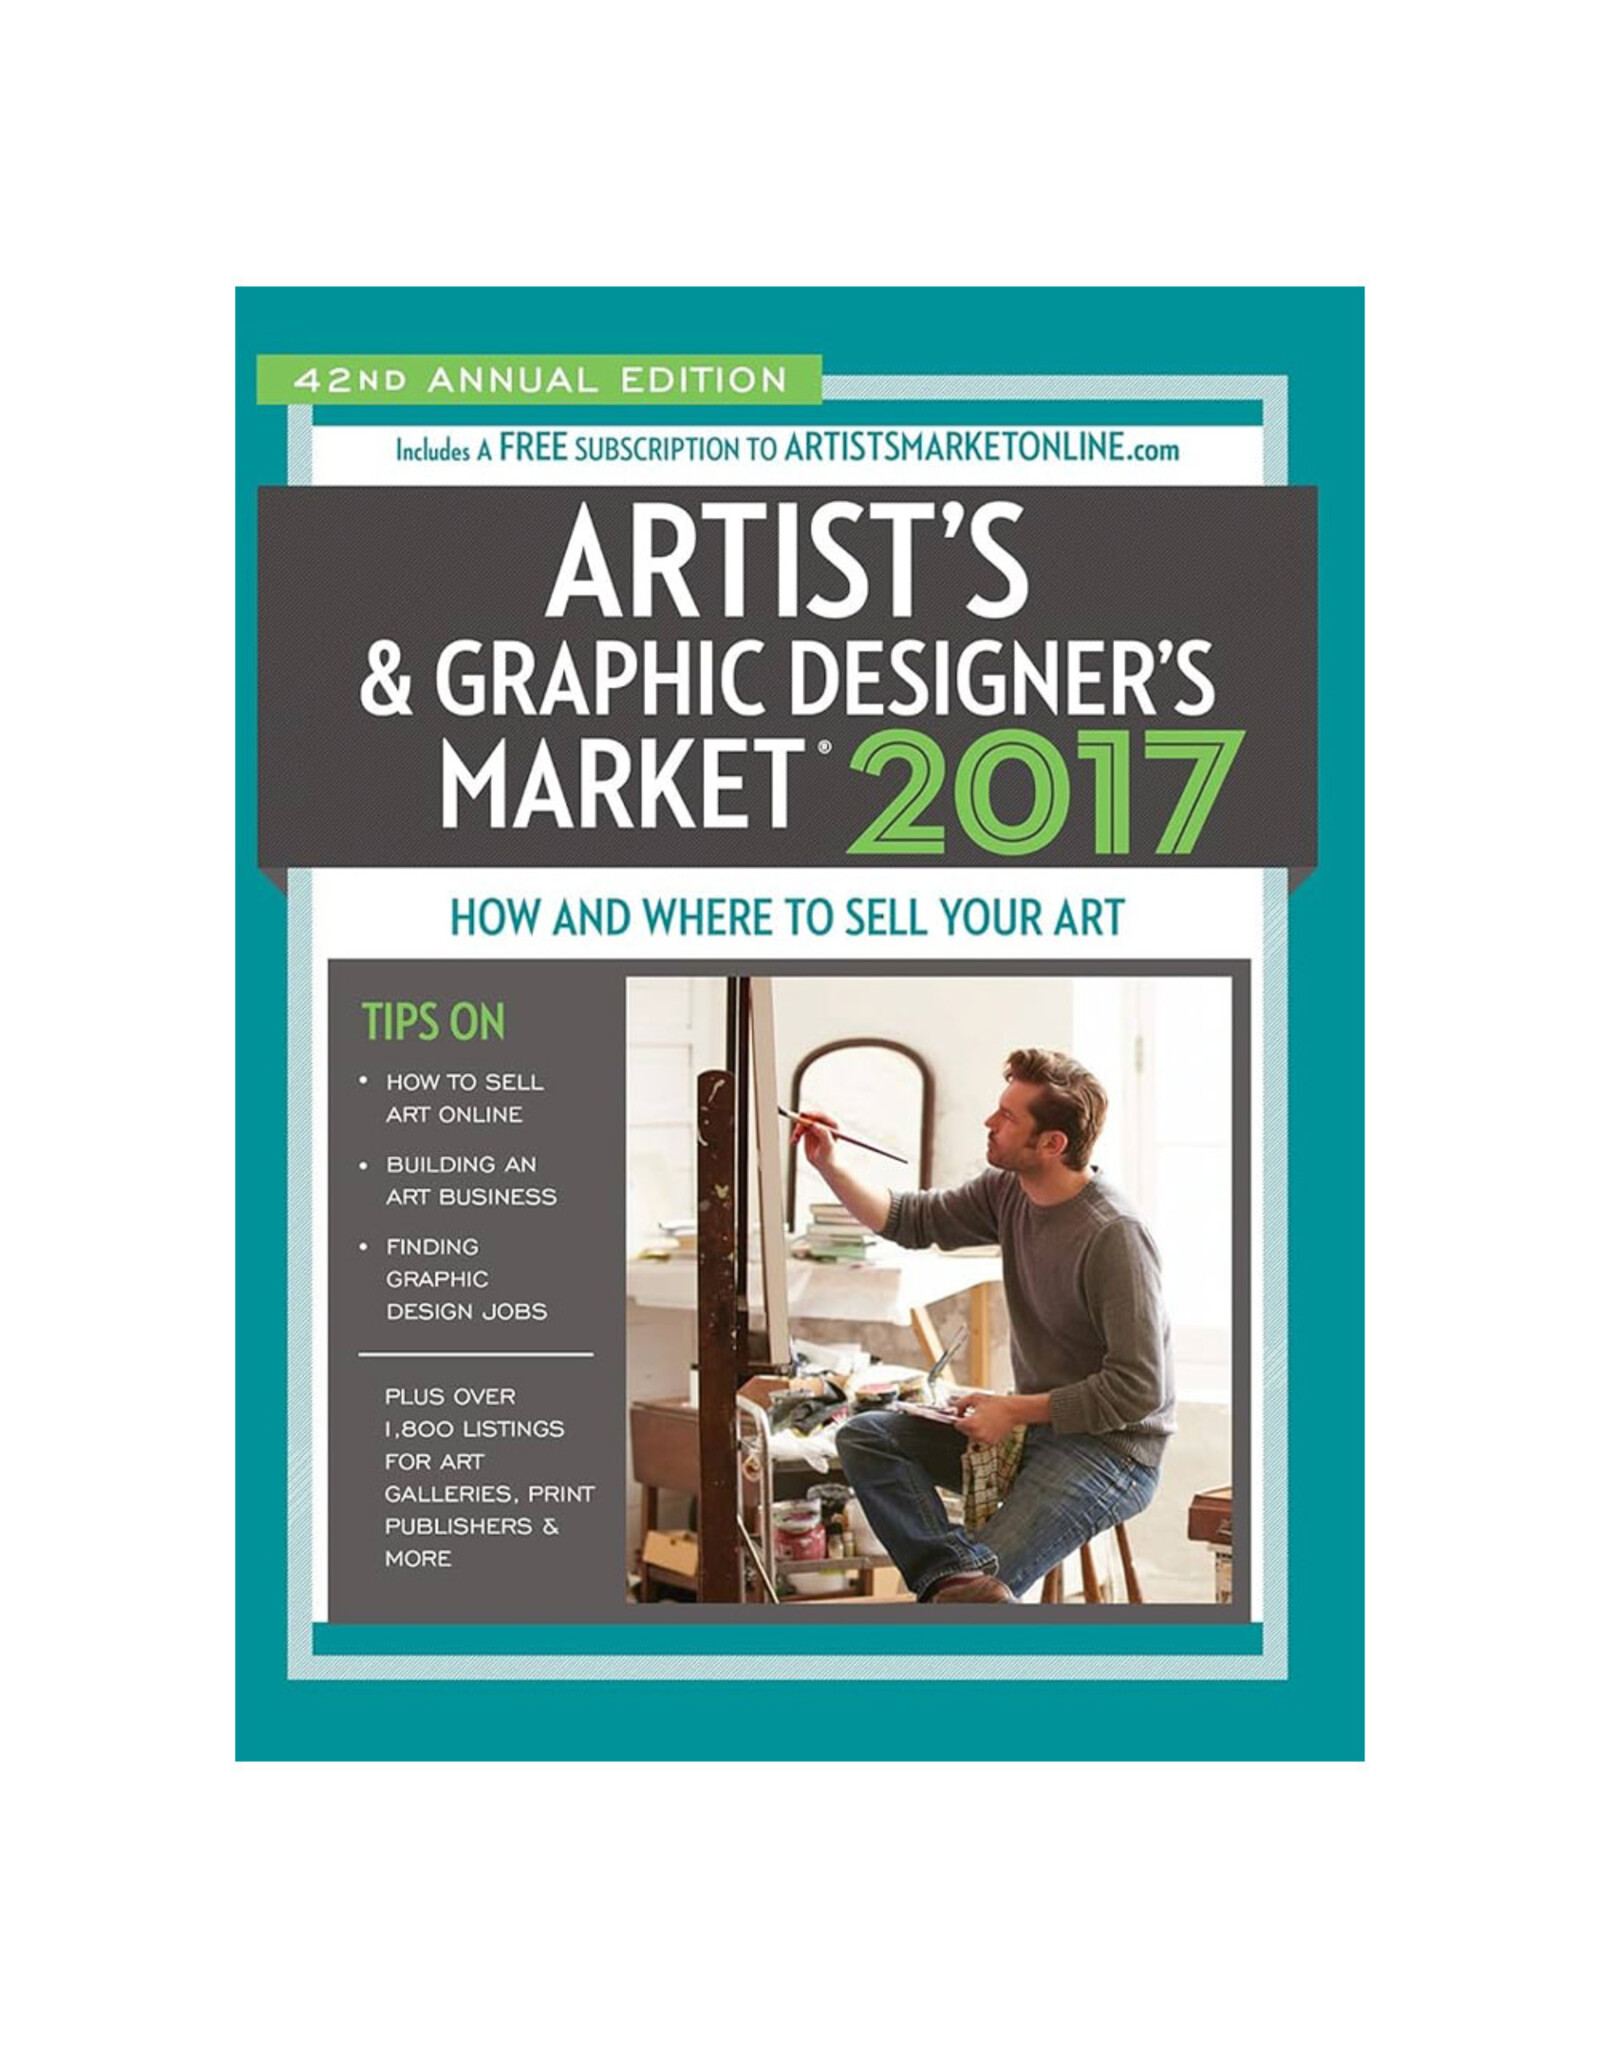 Artist's & Graphic Designer's Market 2017: How and Where to Sell Your Art